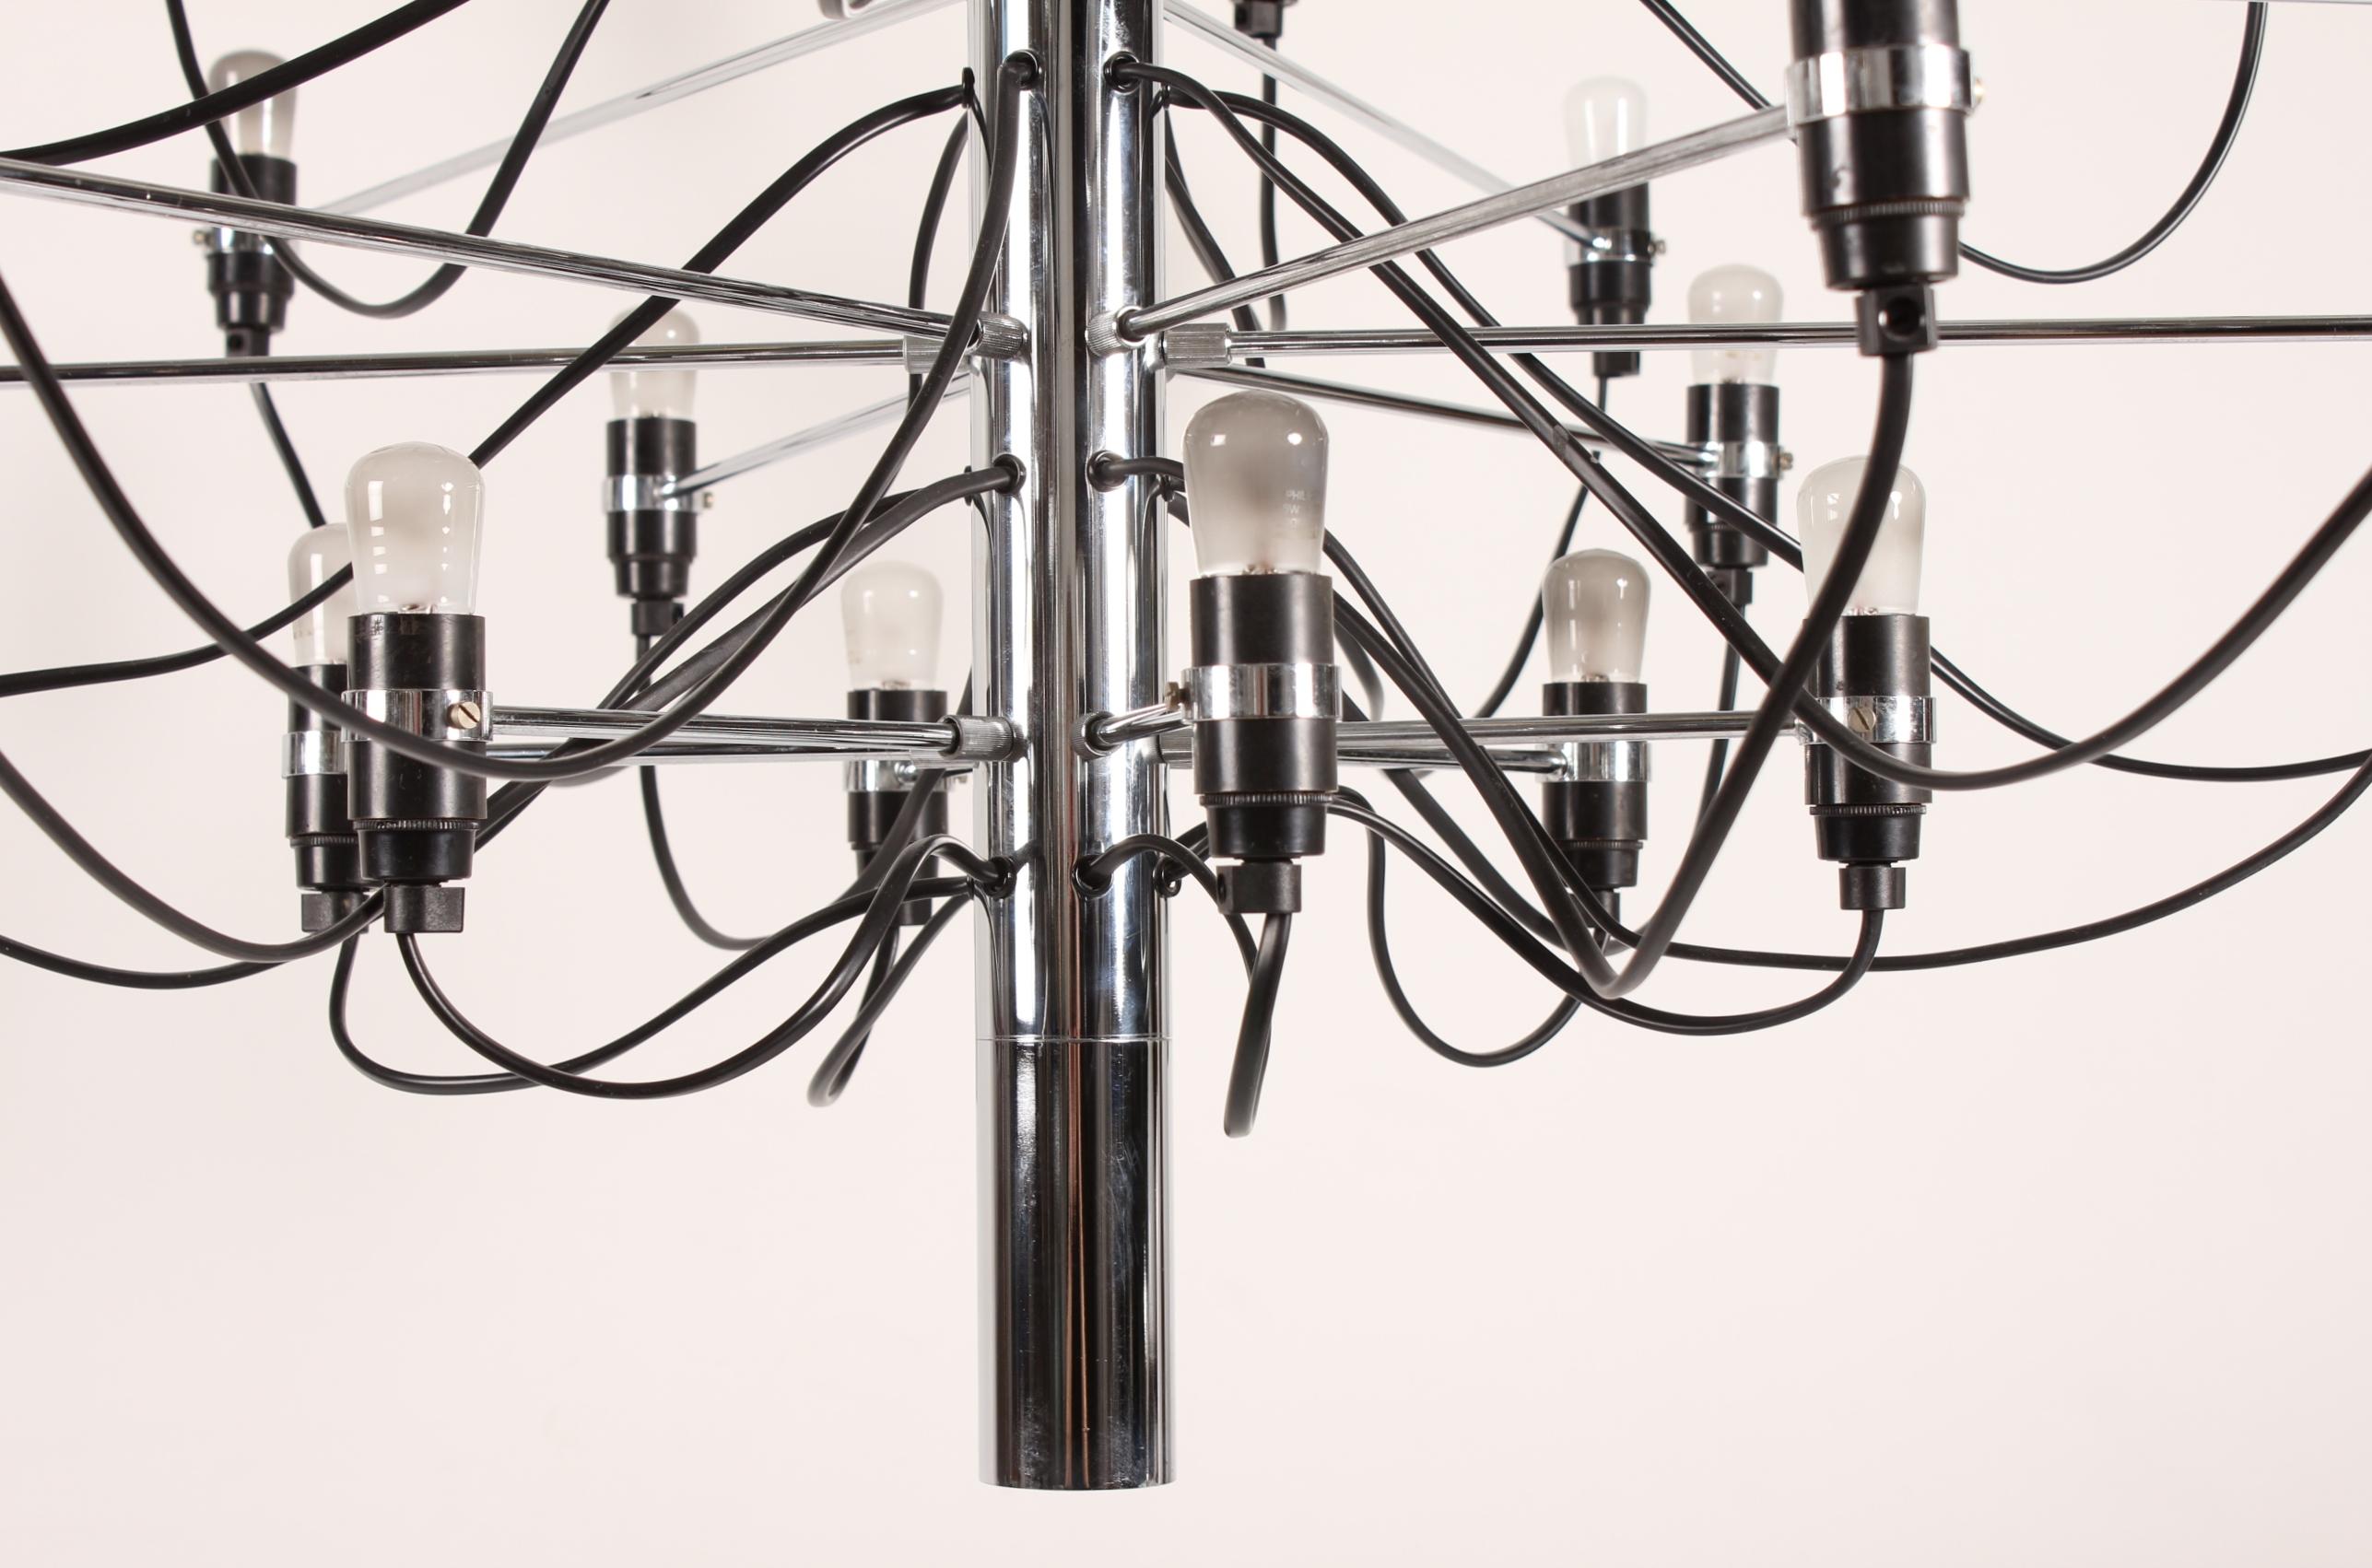 Vintage Gino Sarfatti (1912-1984) chandelier model 2097 with 30 arms and bulbs designed in 1958.
It's made of metal with chrome and made by Flos in the 1980s.